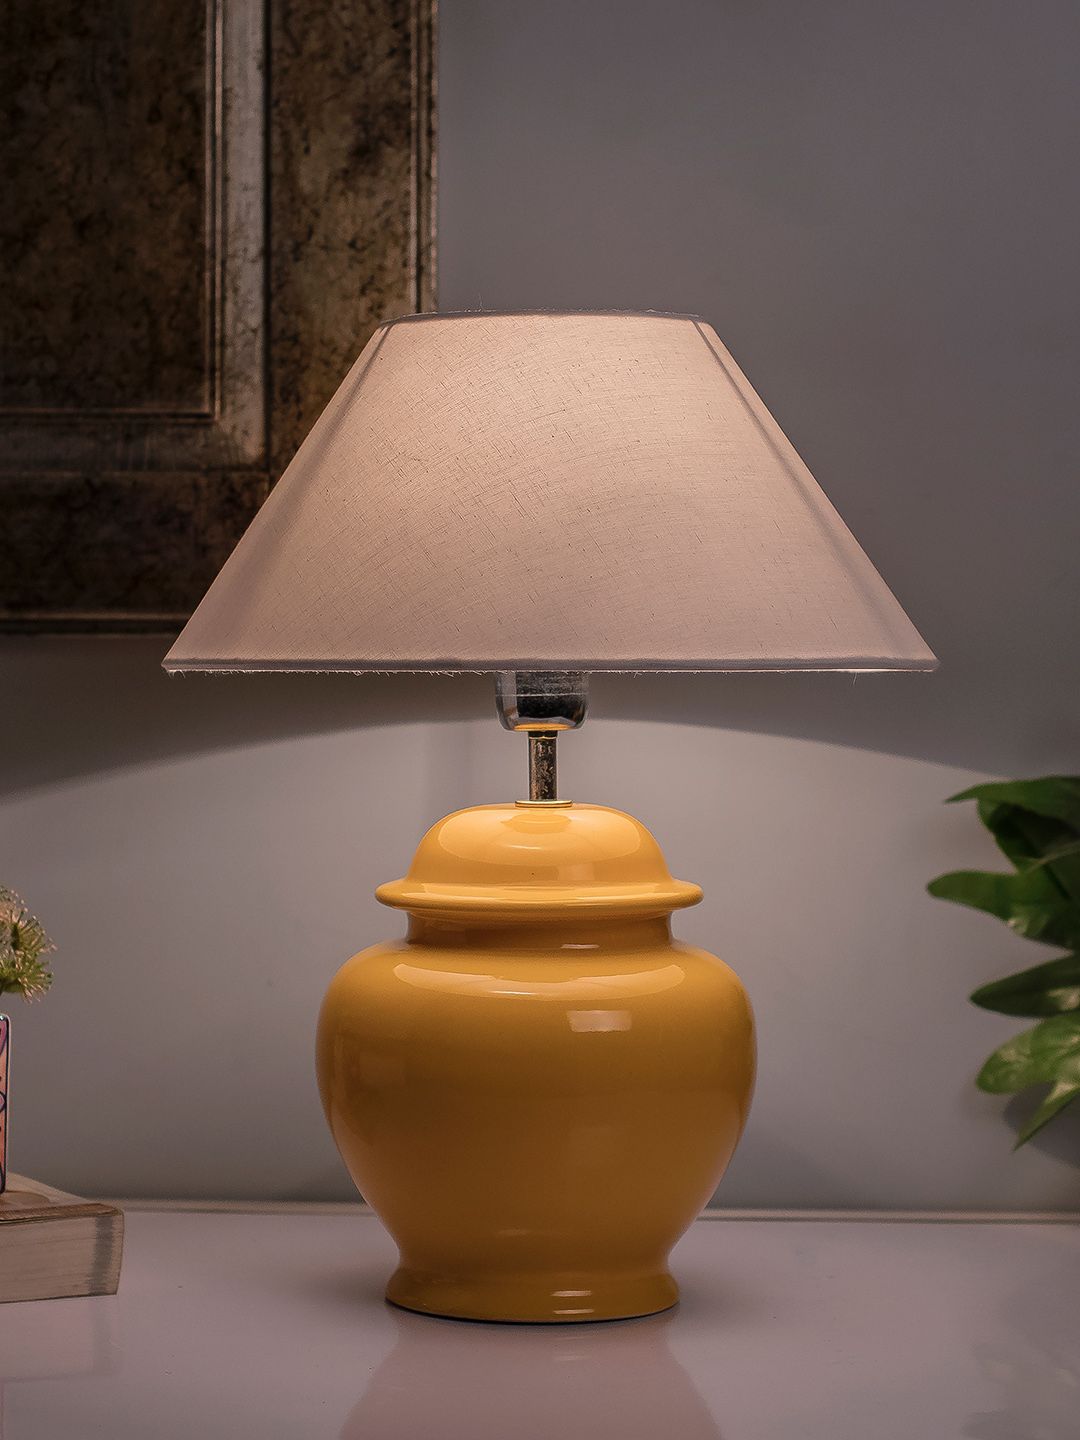 Homesake Yellow Solid Ceramic Pot Shaped Handcrafted Table Lamp with Shade Price in India